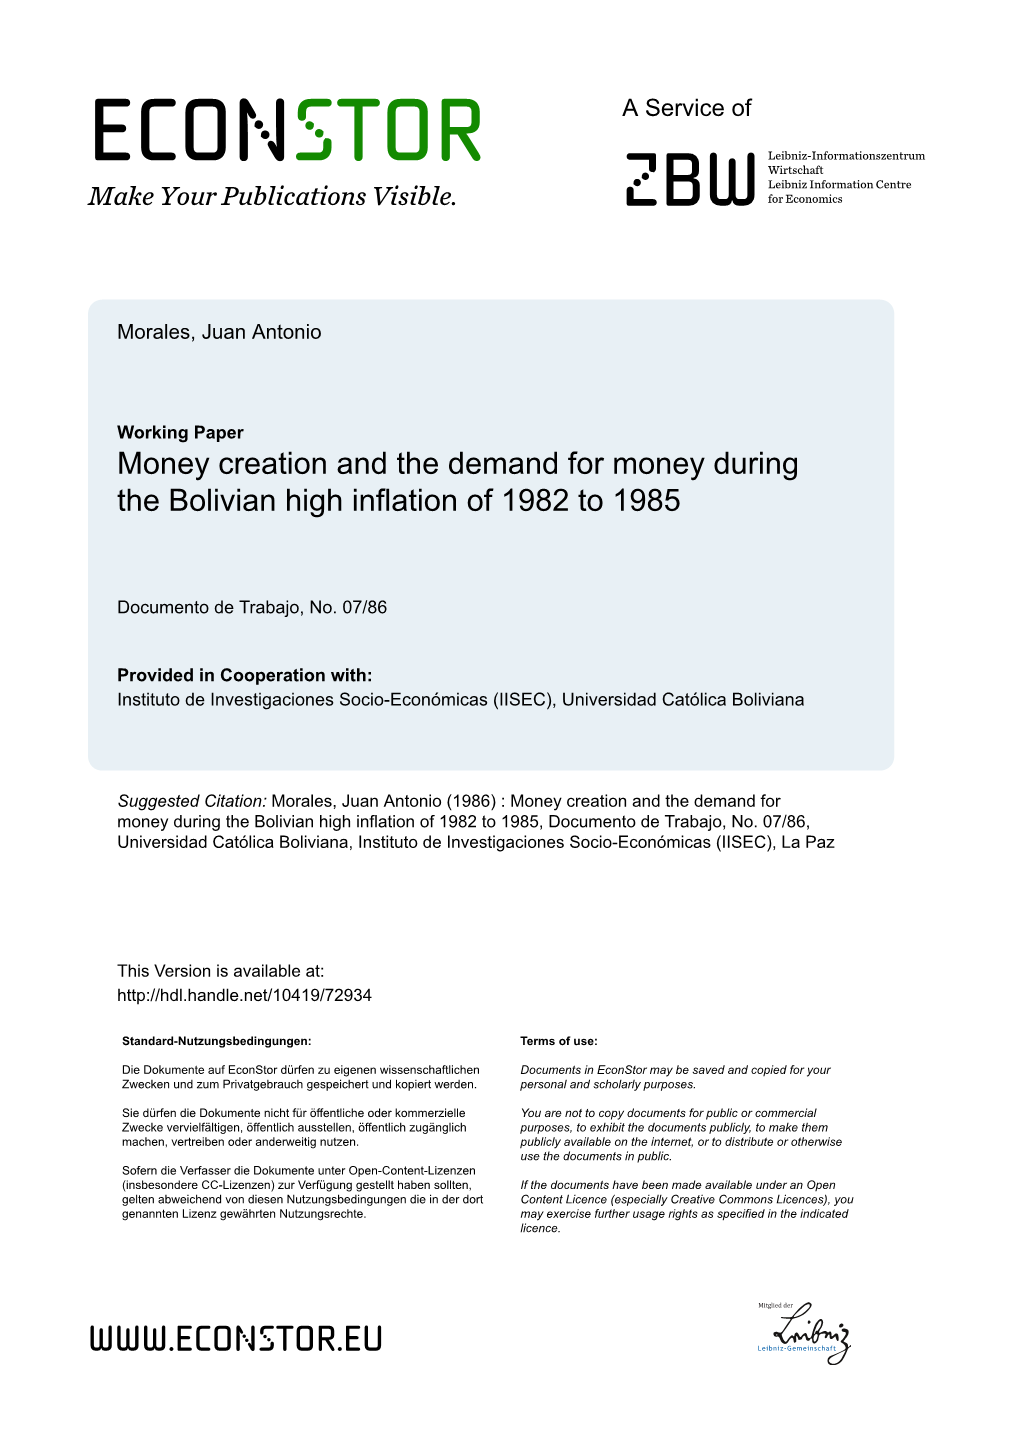 Money Creation and the Demand for Money During the Bolivian High Inflation of 1982 to 1985